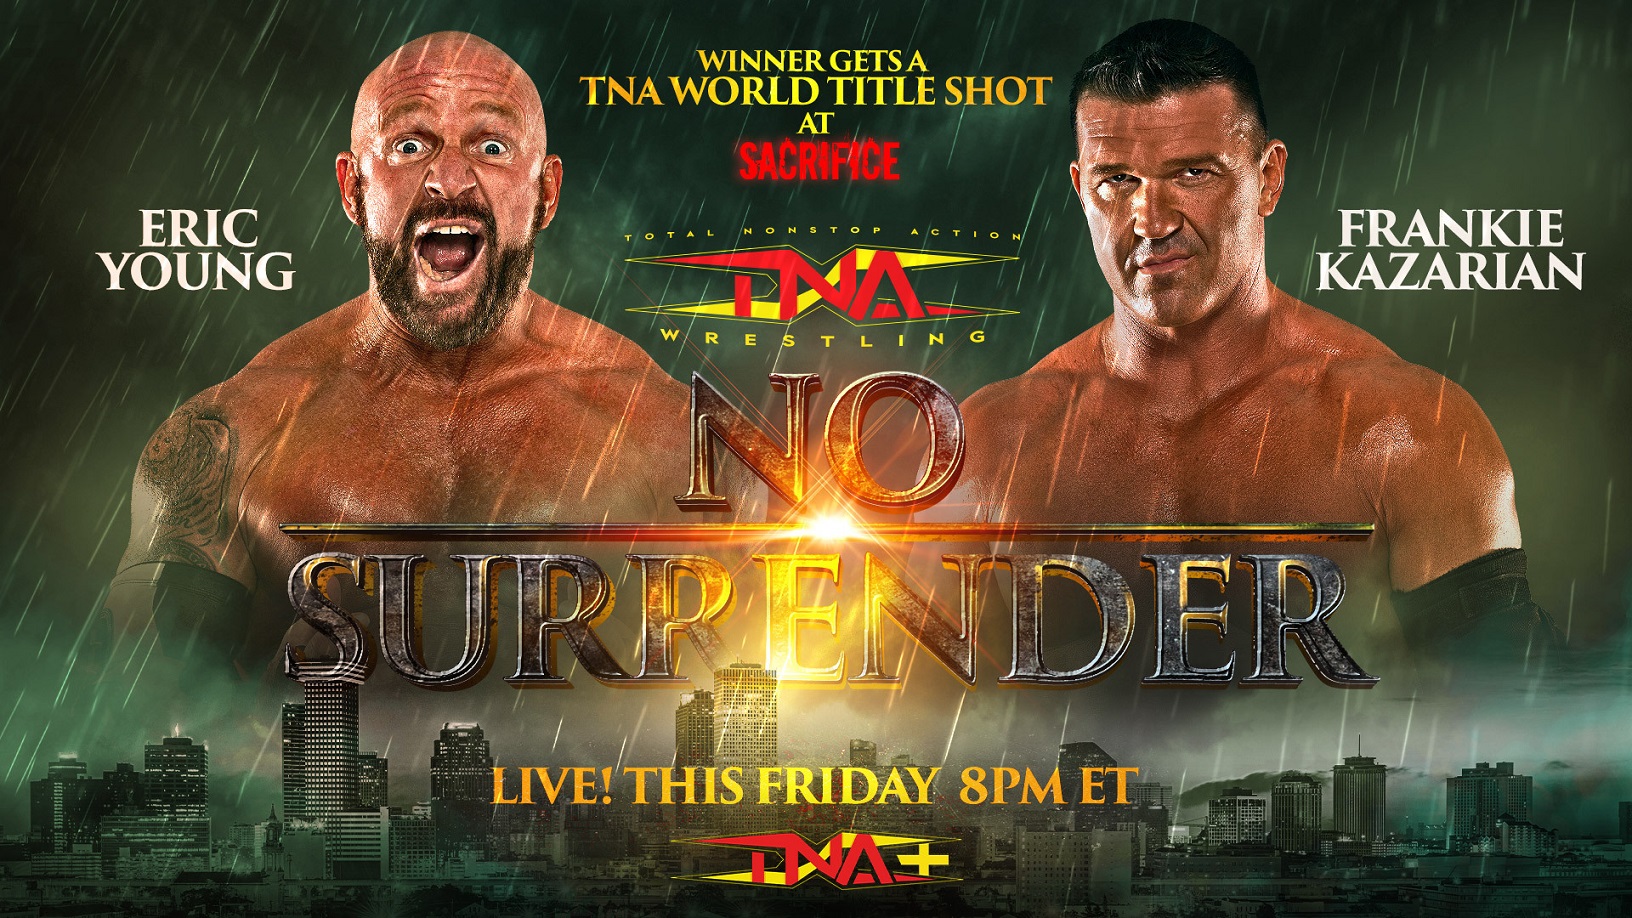 Eric Young Gets His Hands on Frankie Kazarian With TNA World Title Shot Up For Grabs – TNA Wrestling